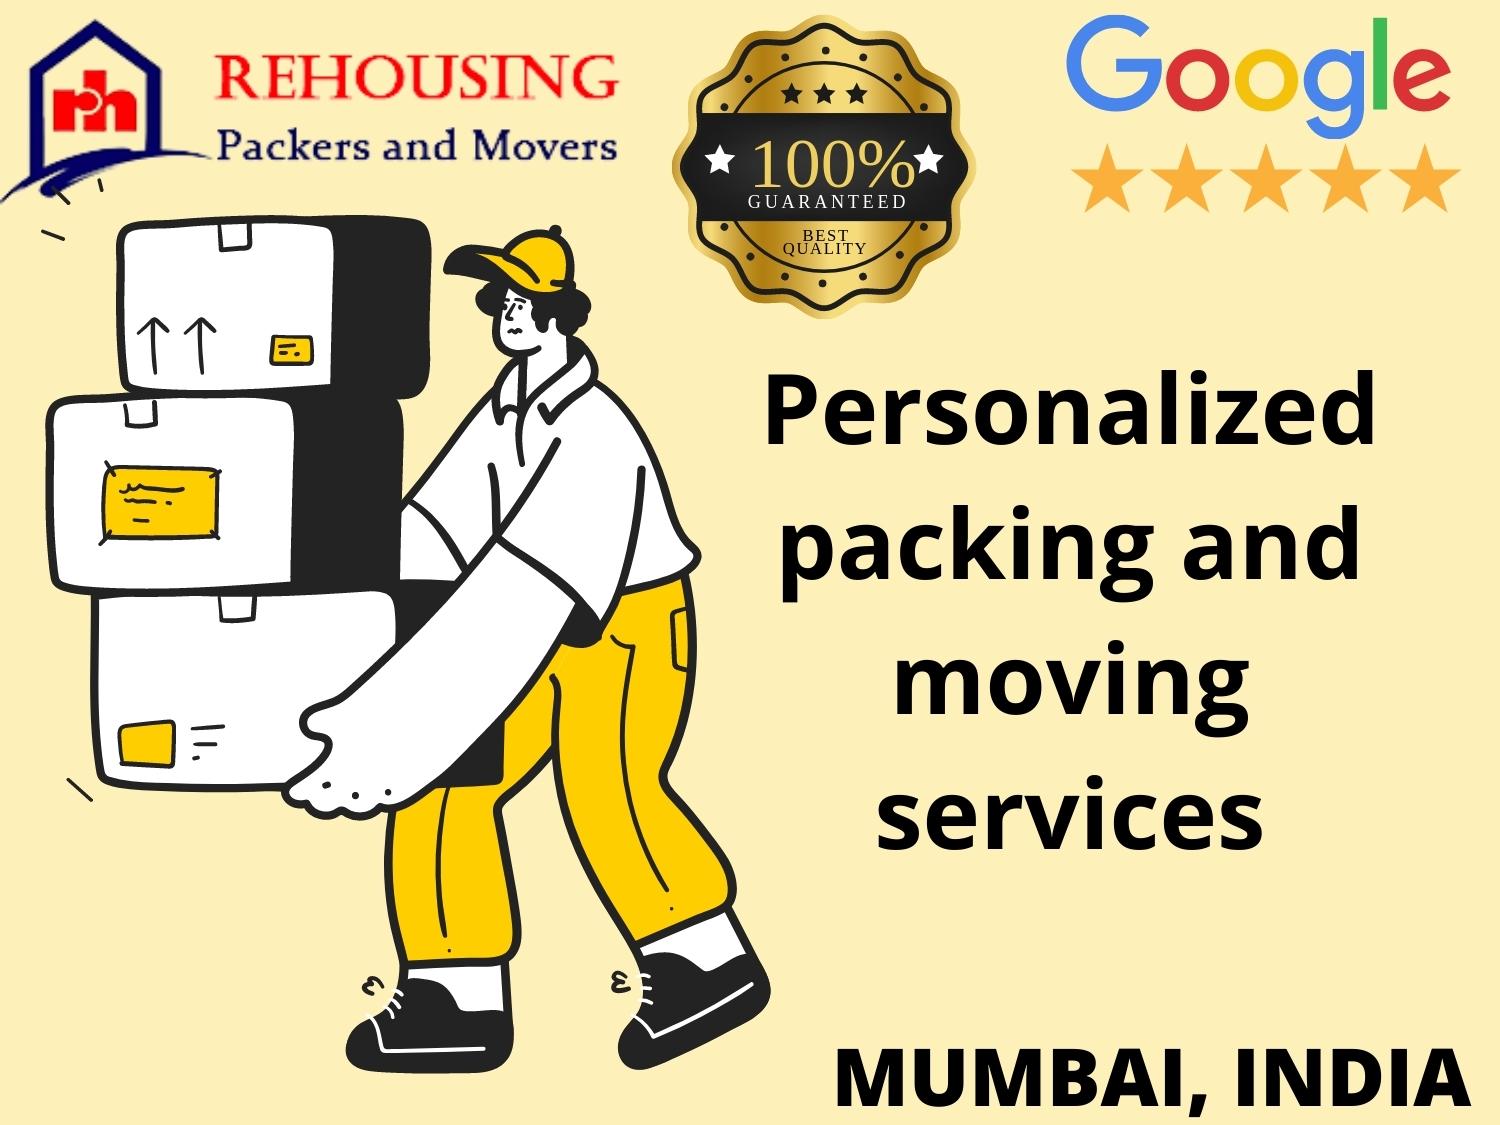 Home shifting services in Mumbai provided by Rehousing packers and movers are of the highest quality at the best price